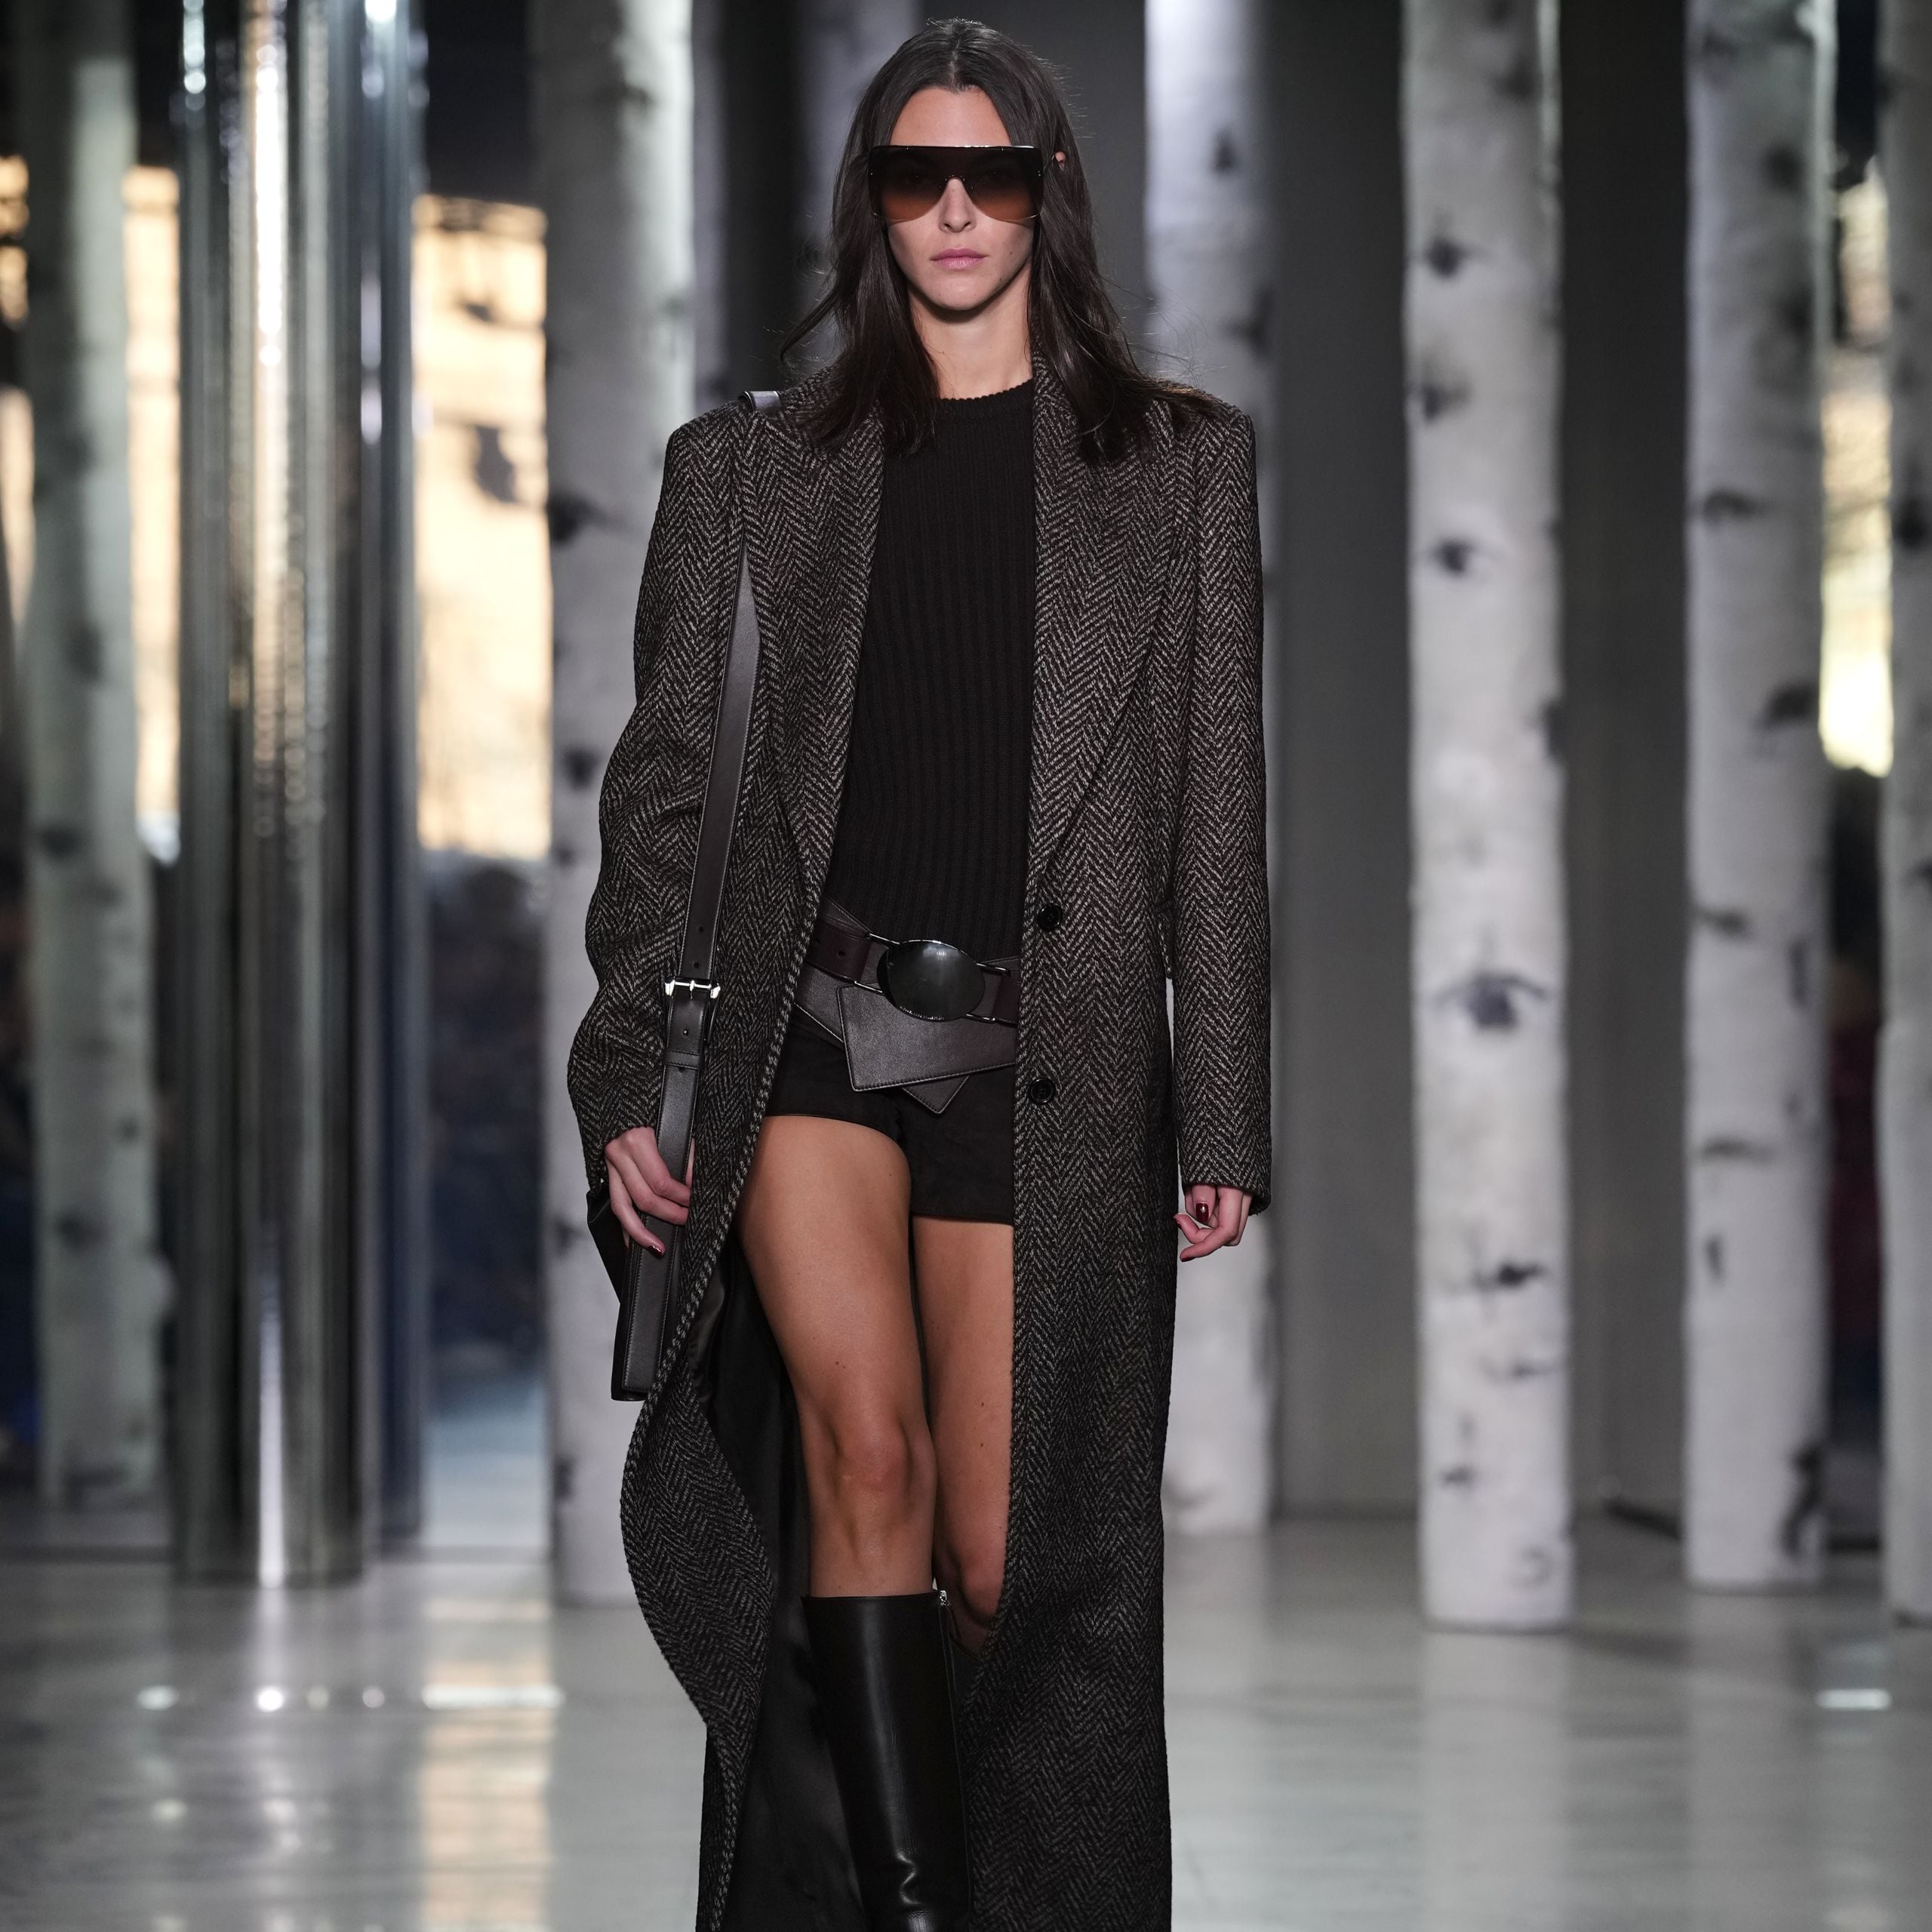 Michael Kors Collection Fall 2022 Ready-to-Wear Fashion Show